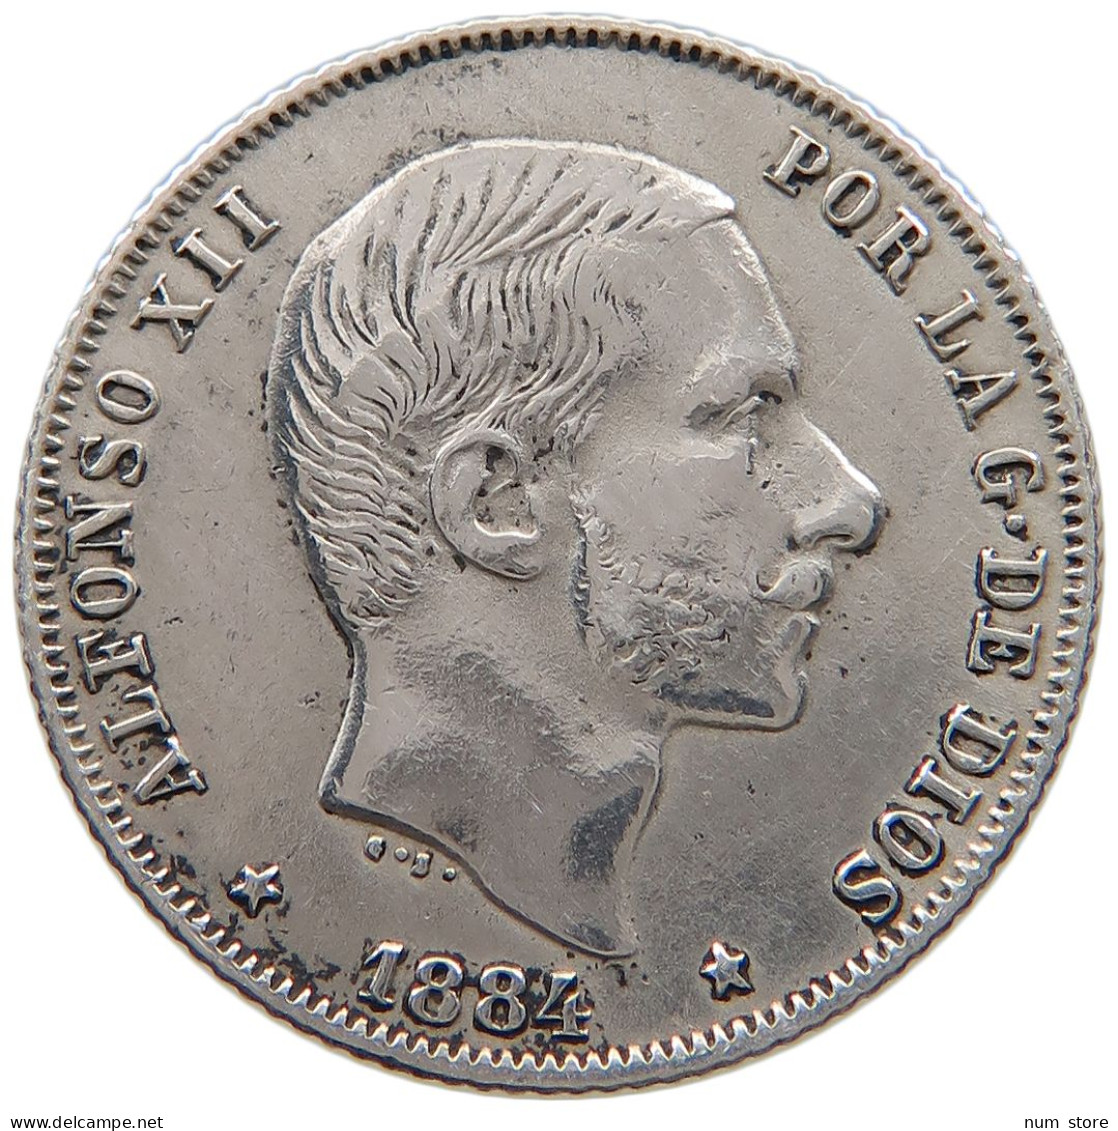 PHILIPPINES SPANISH 20 CENTIMOS 1884 ALFONSO XII. #t156 0495 - Philippinen